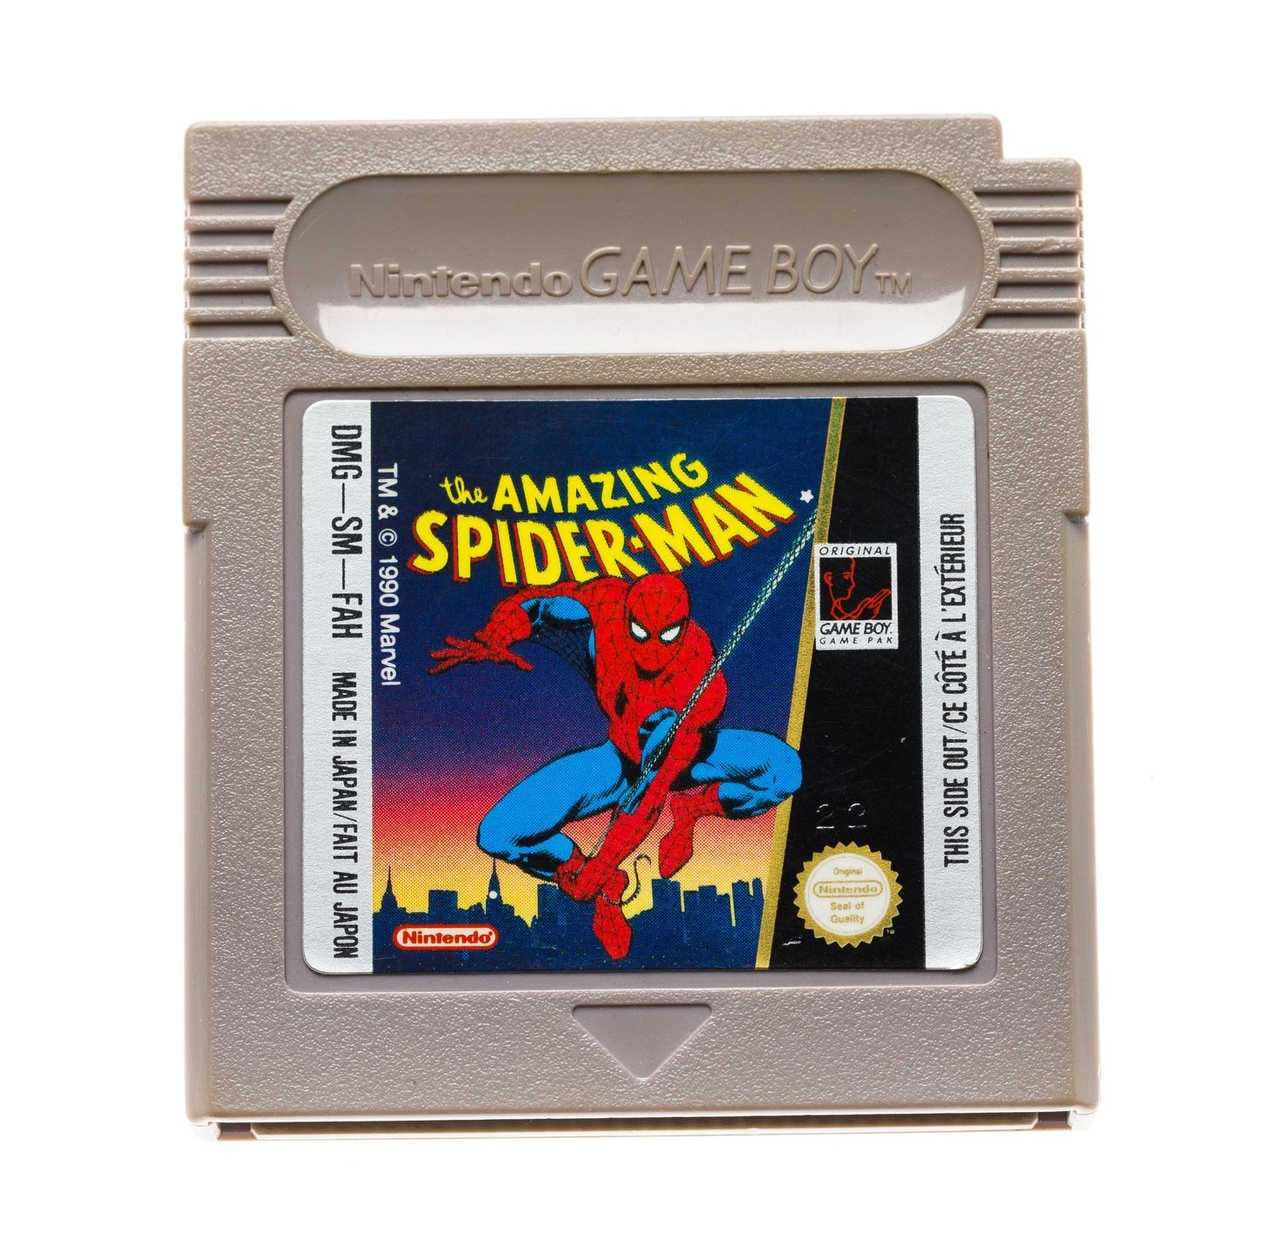 The Amazing Spiderman - Gameboy Classic Games